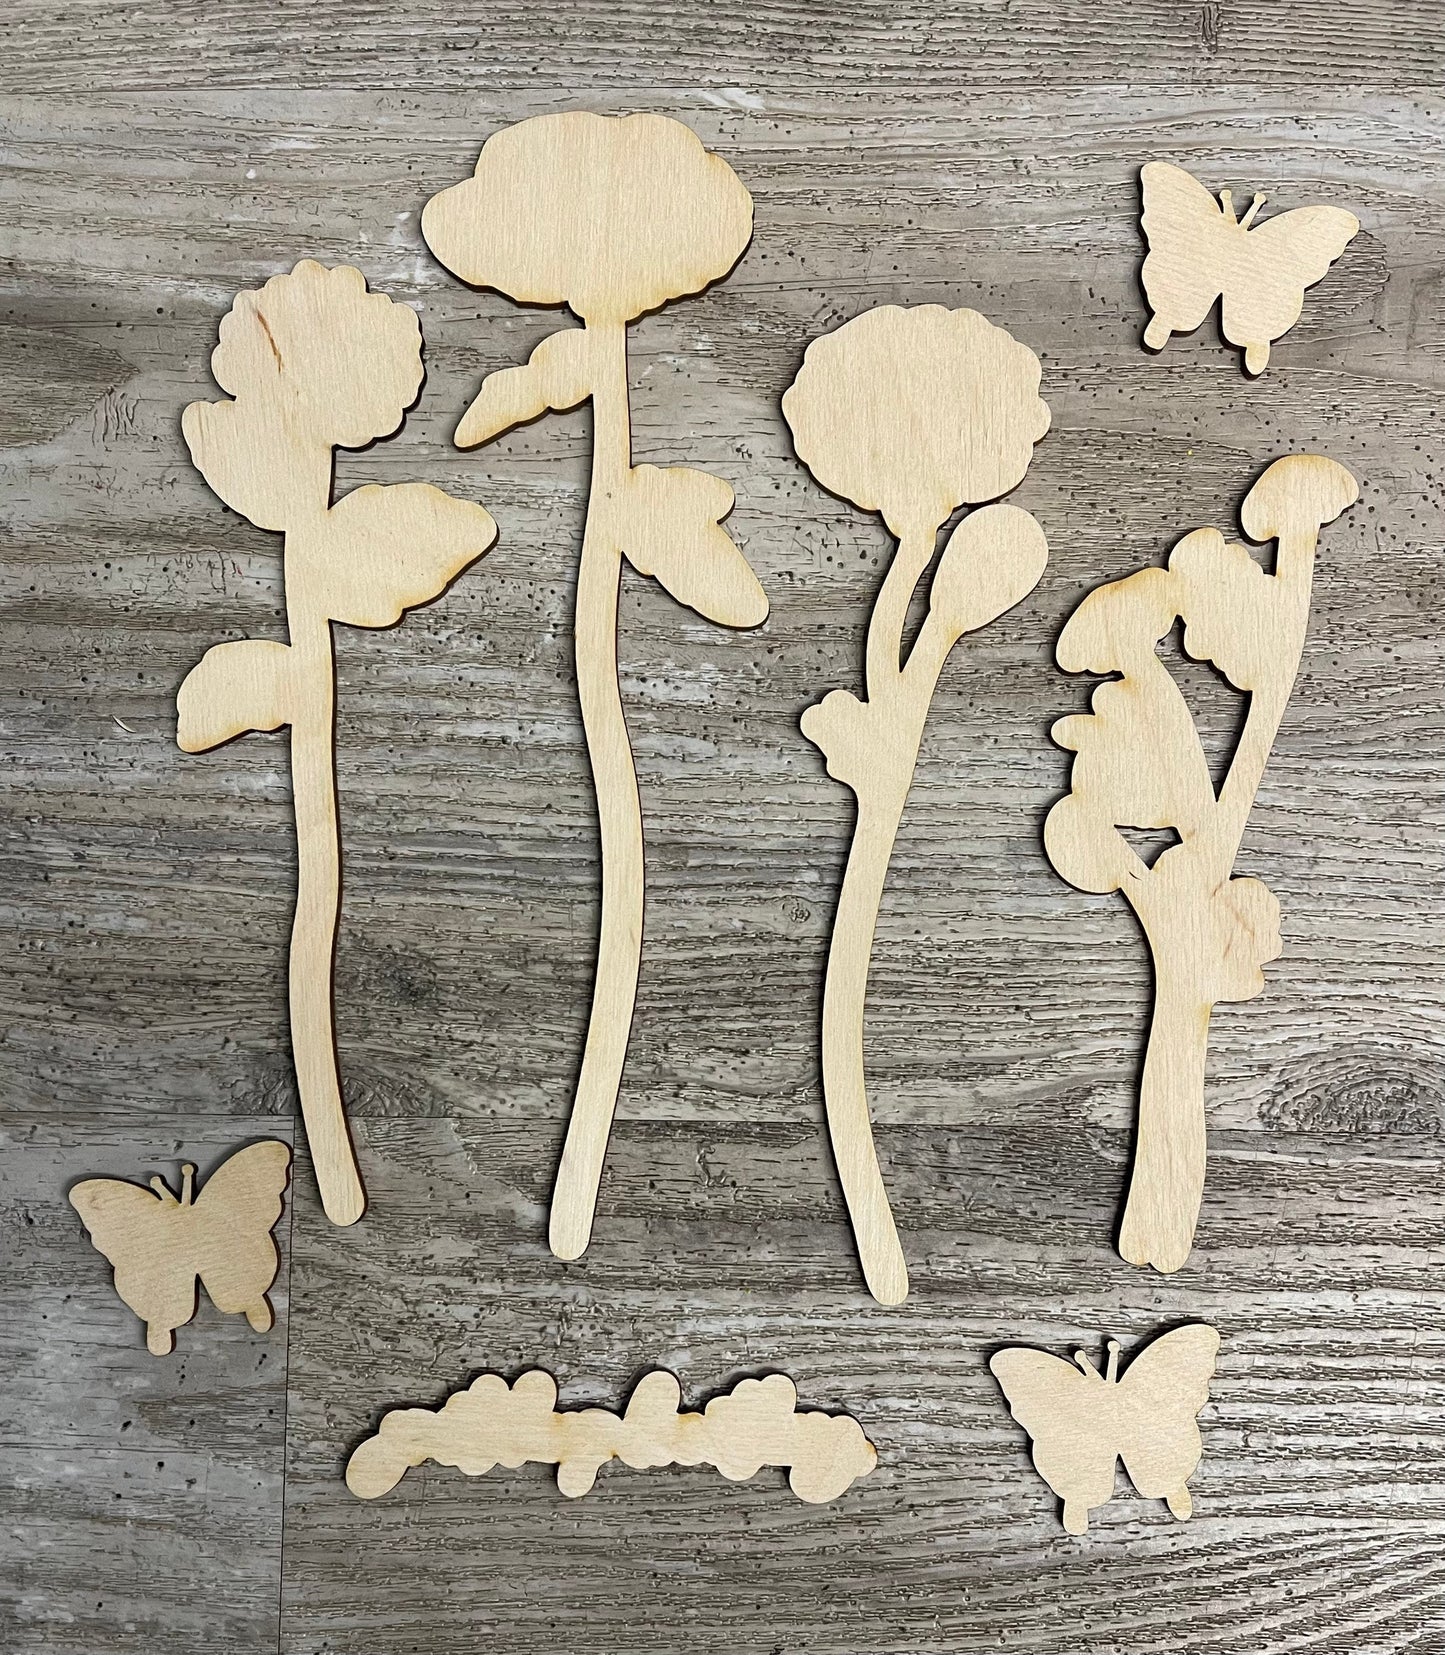 Botanical Just Keep Breathing Cutouts, unpainted wooden cutouts - ready for you to paint, door tag surface not included